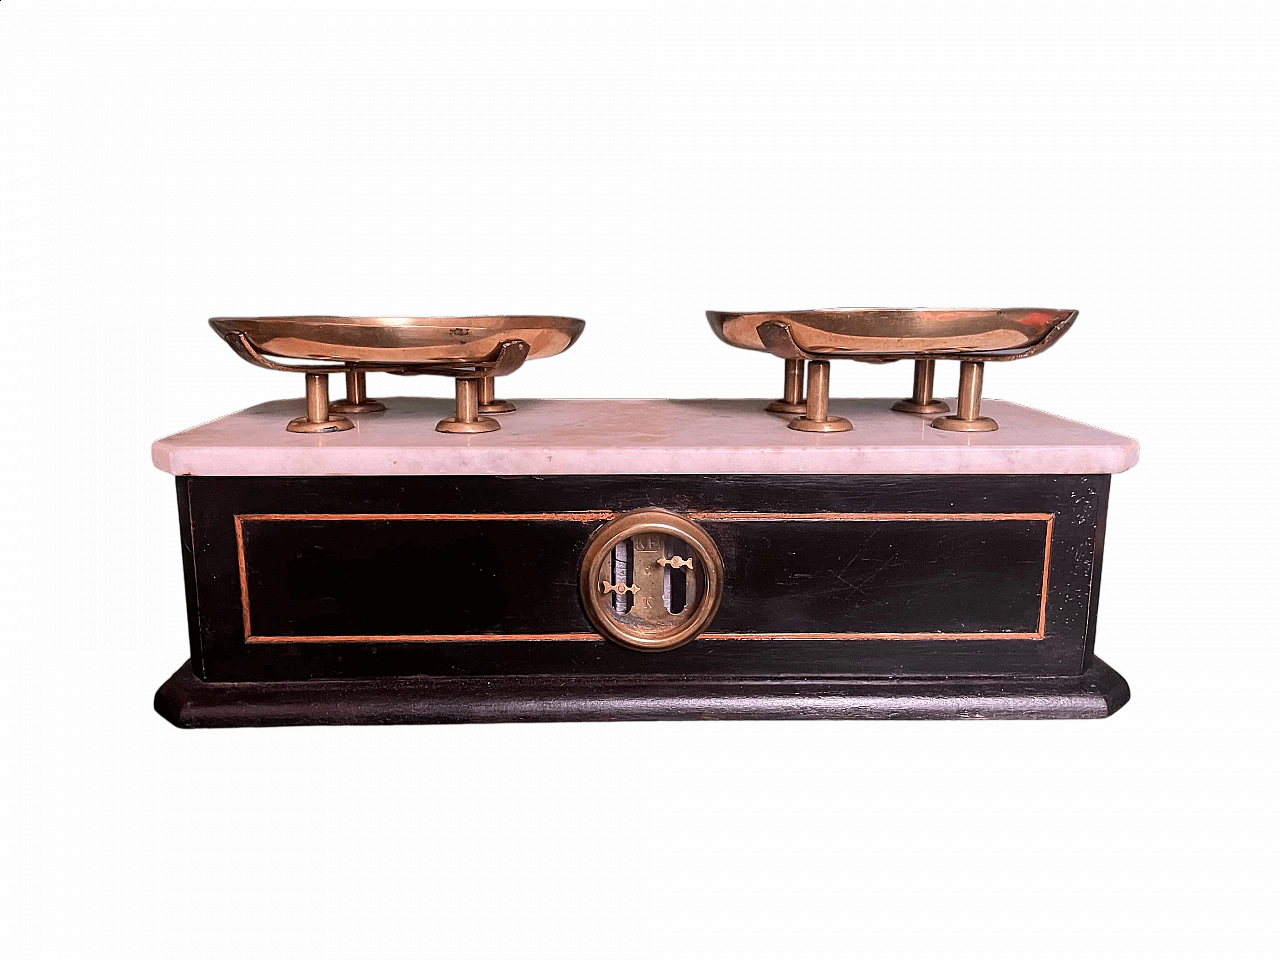 Two-plate scales made of brass, wood and marble, 1920s 18